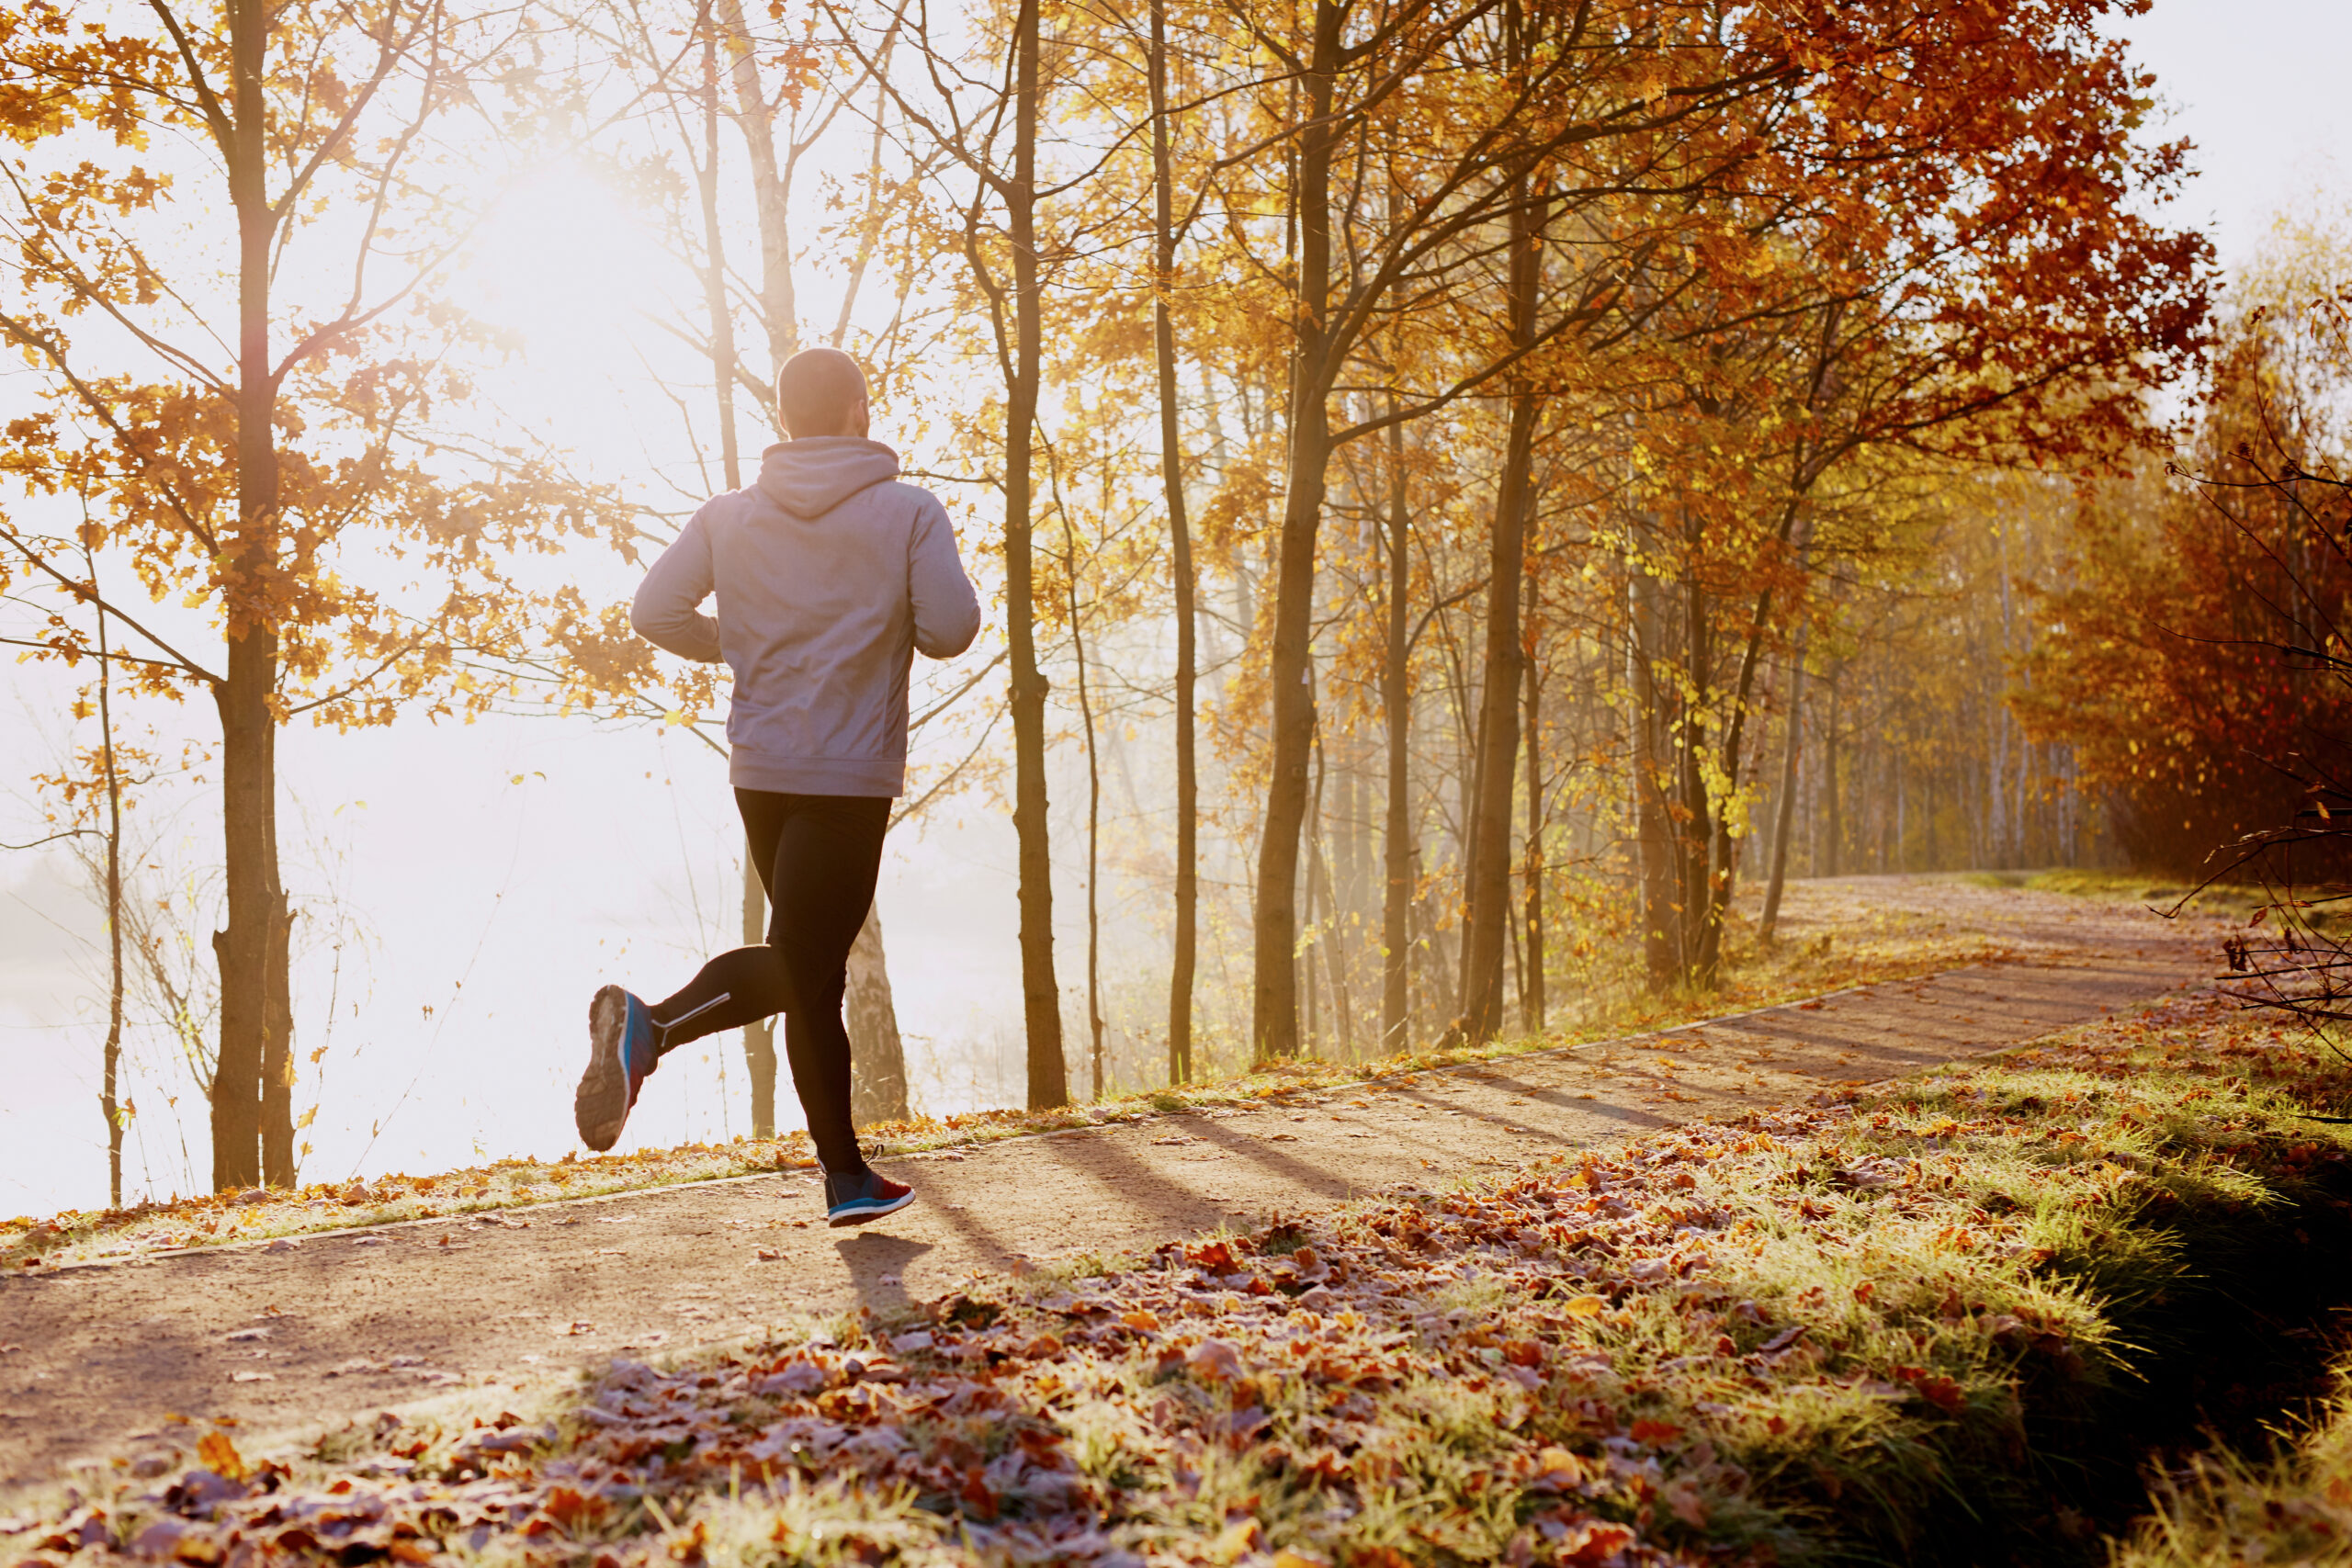 Ways to Stay Active and Enjoy the Fall Weather